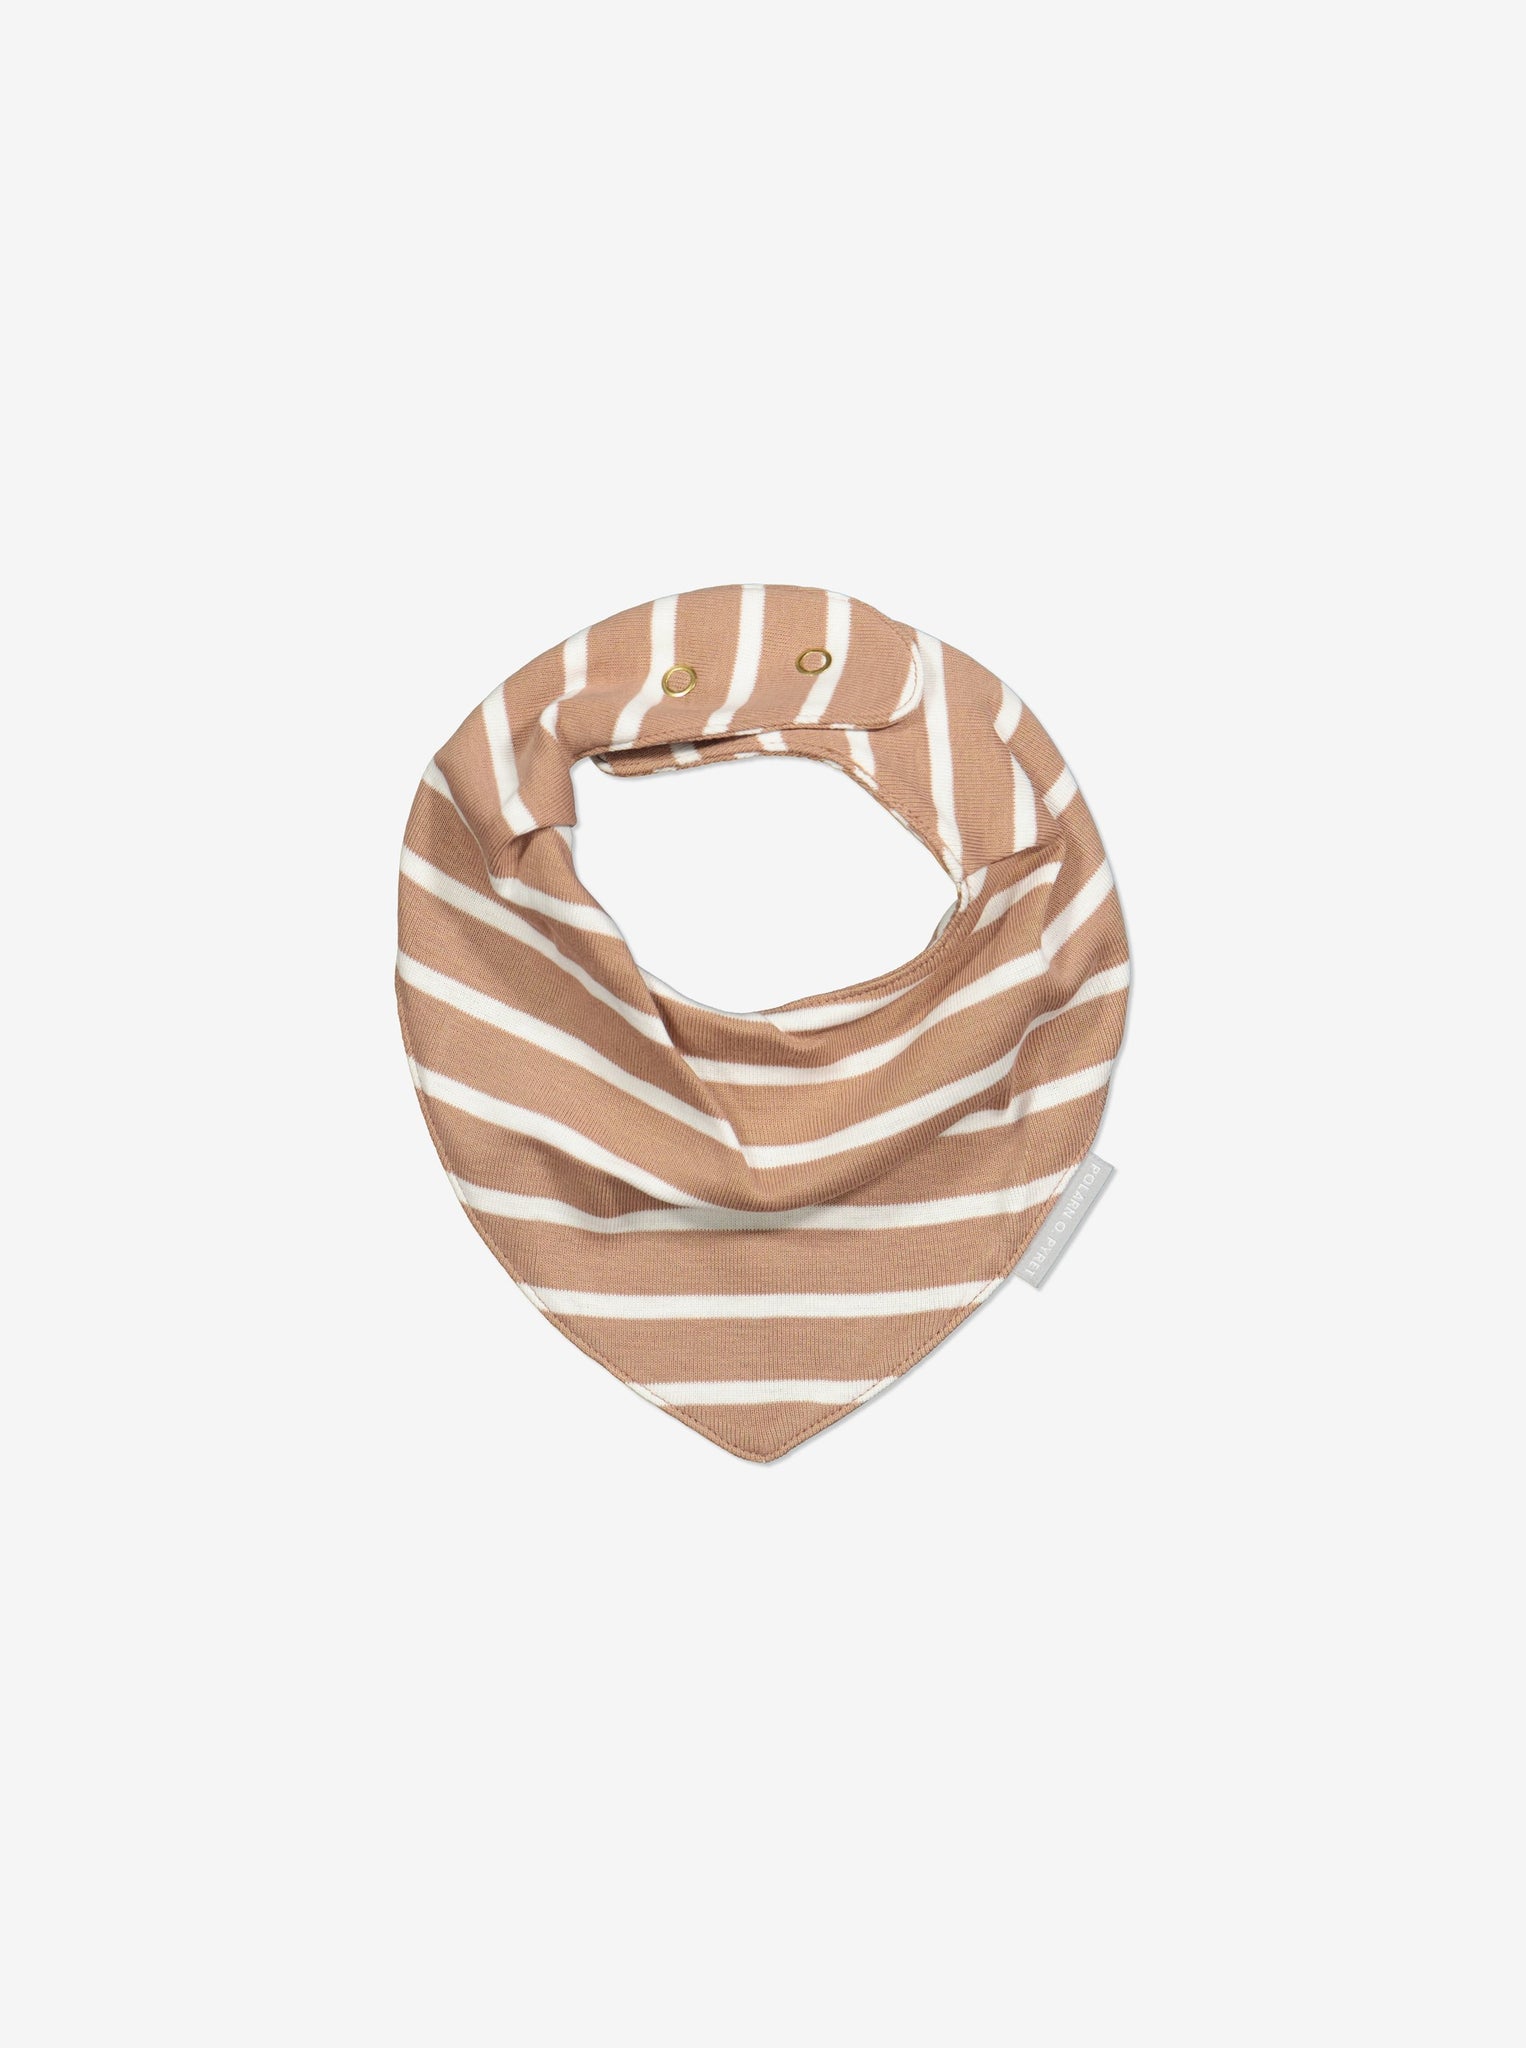  Organic Striped Brown Baby Bibs from Polarn O. Pyret Kidswear. Made with 100% organic cotton.